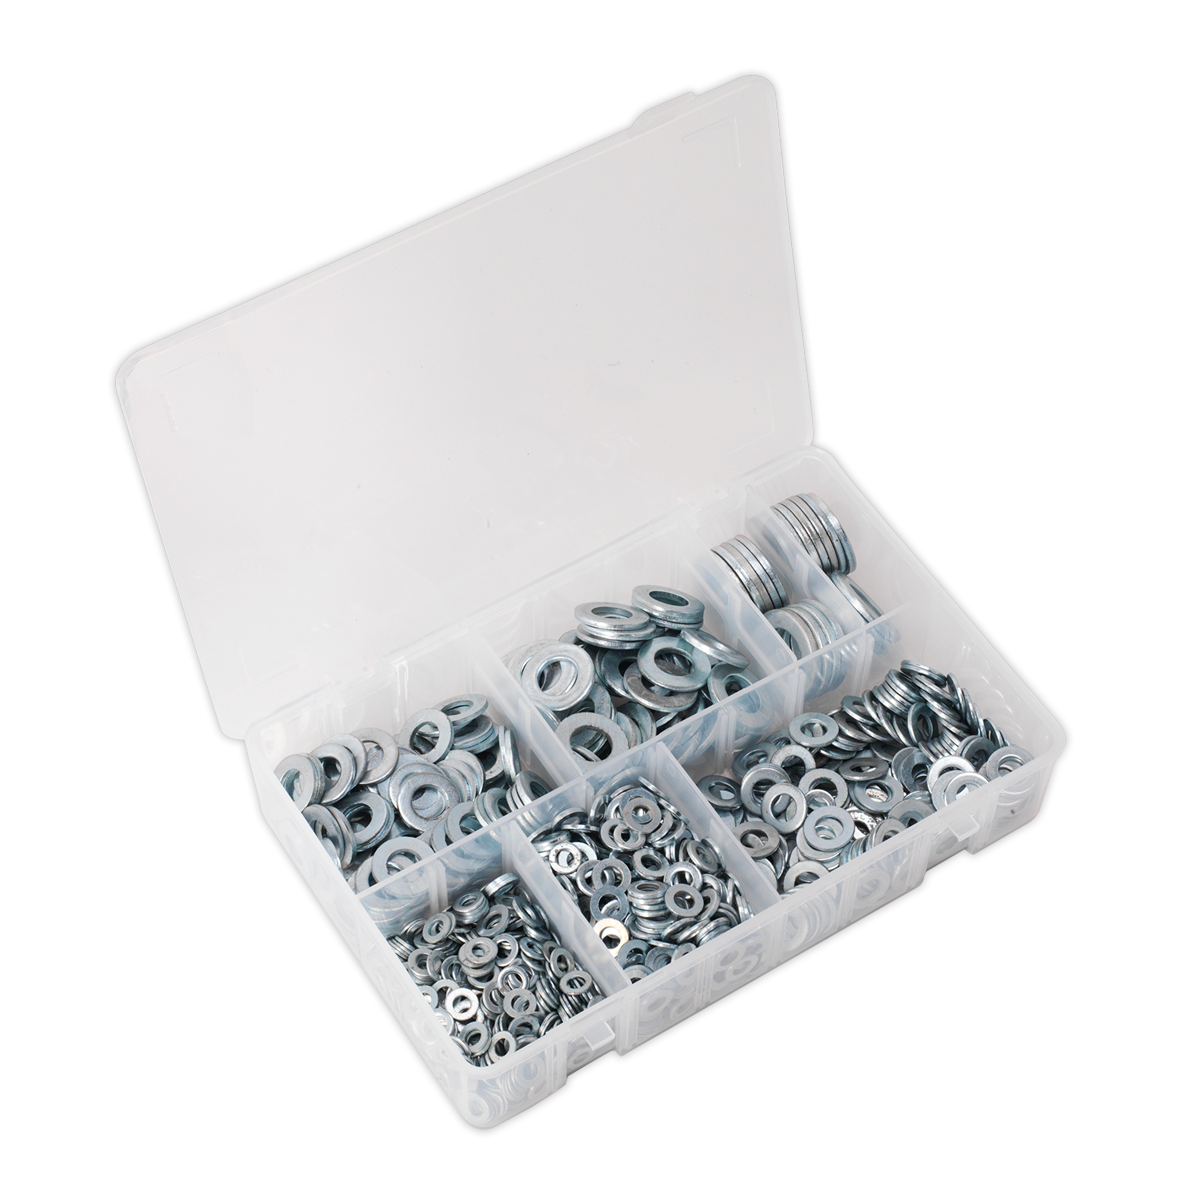 Sealey Flat Washer Assortment 1070pc M5-M16 Form A Metric